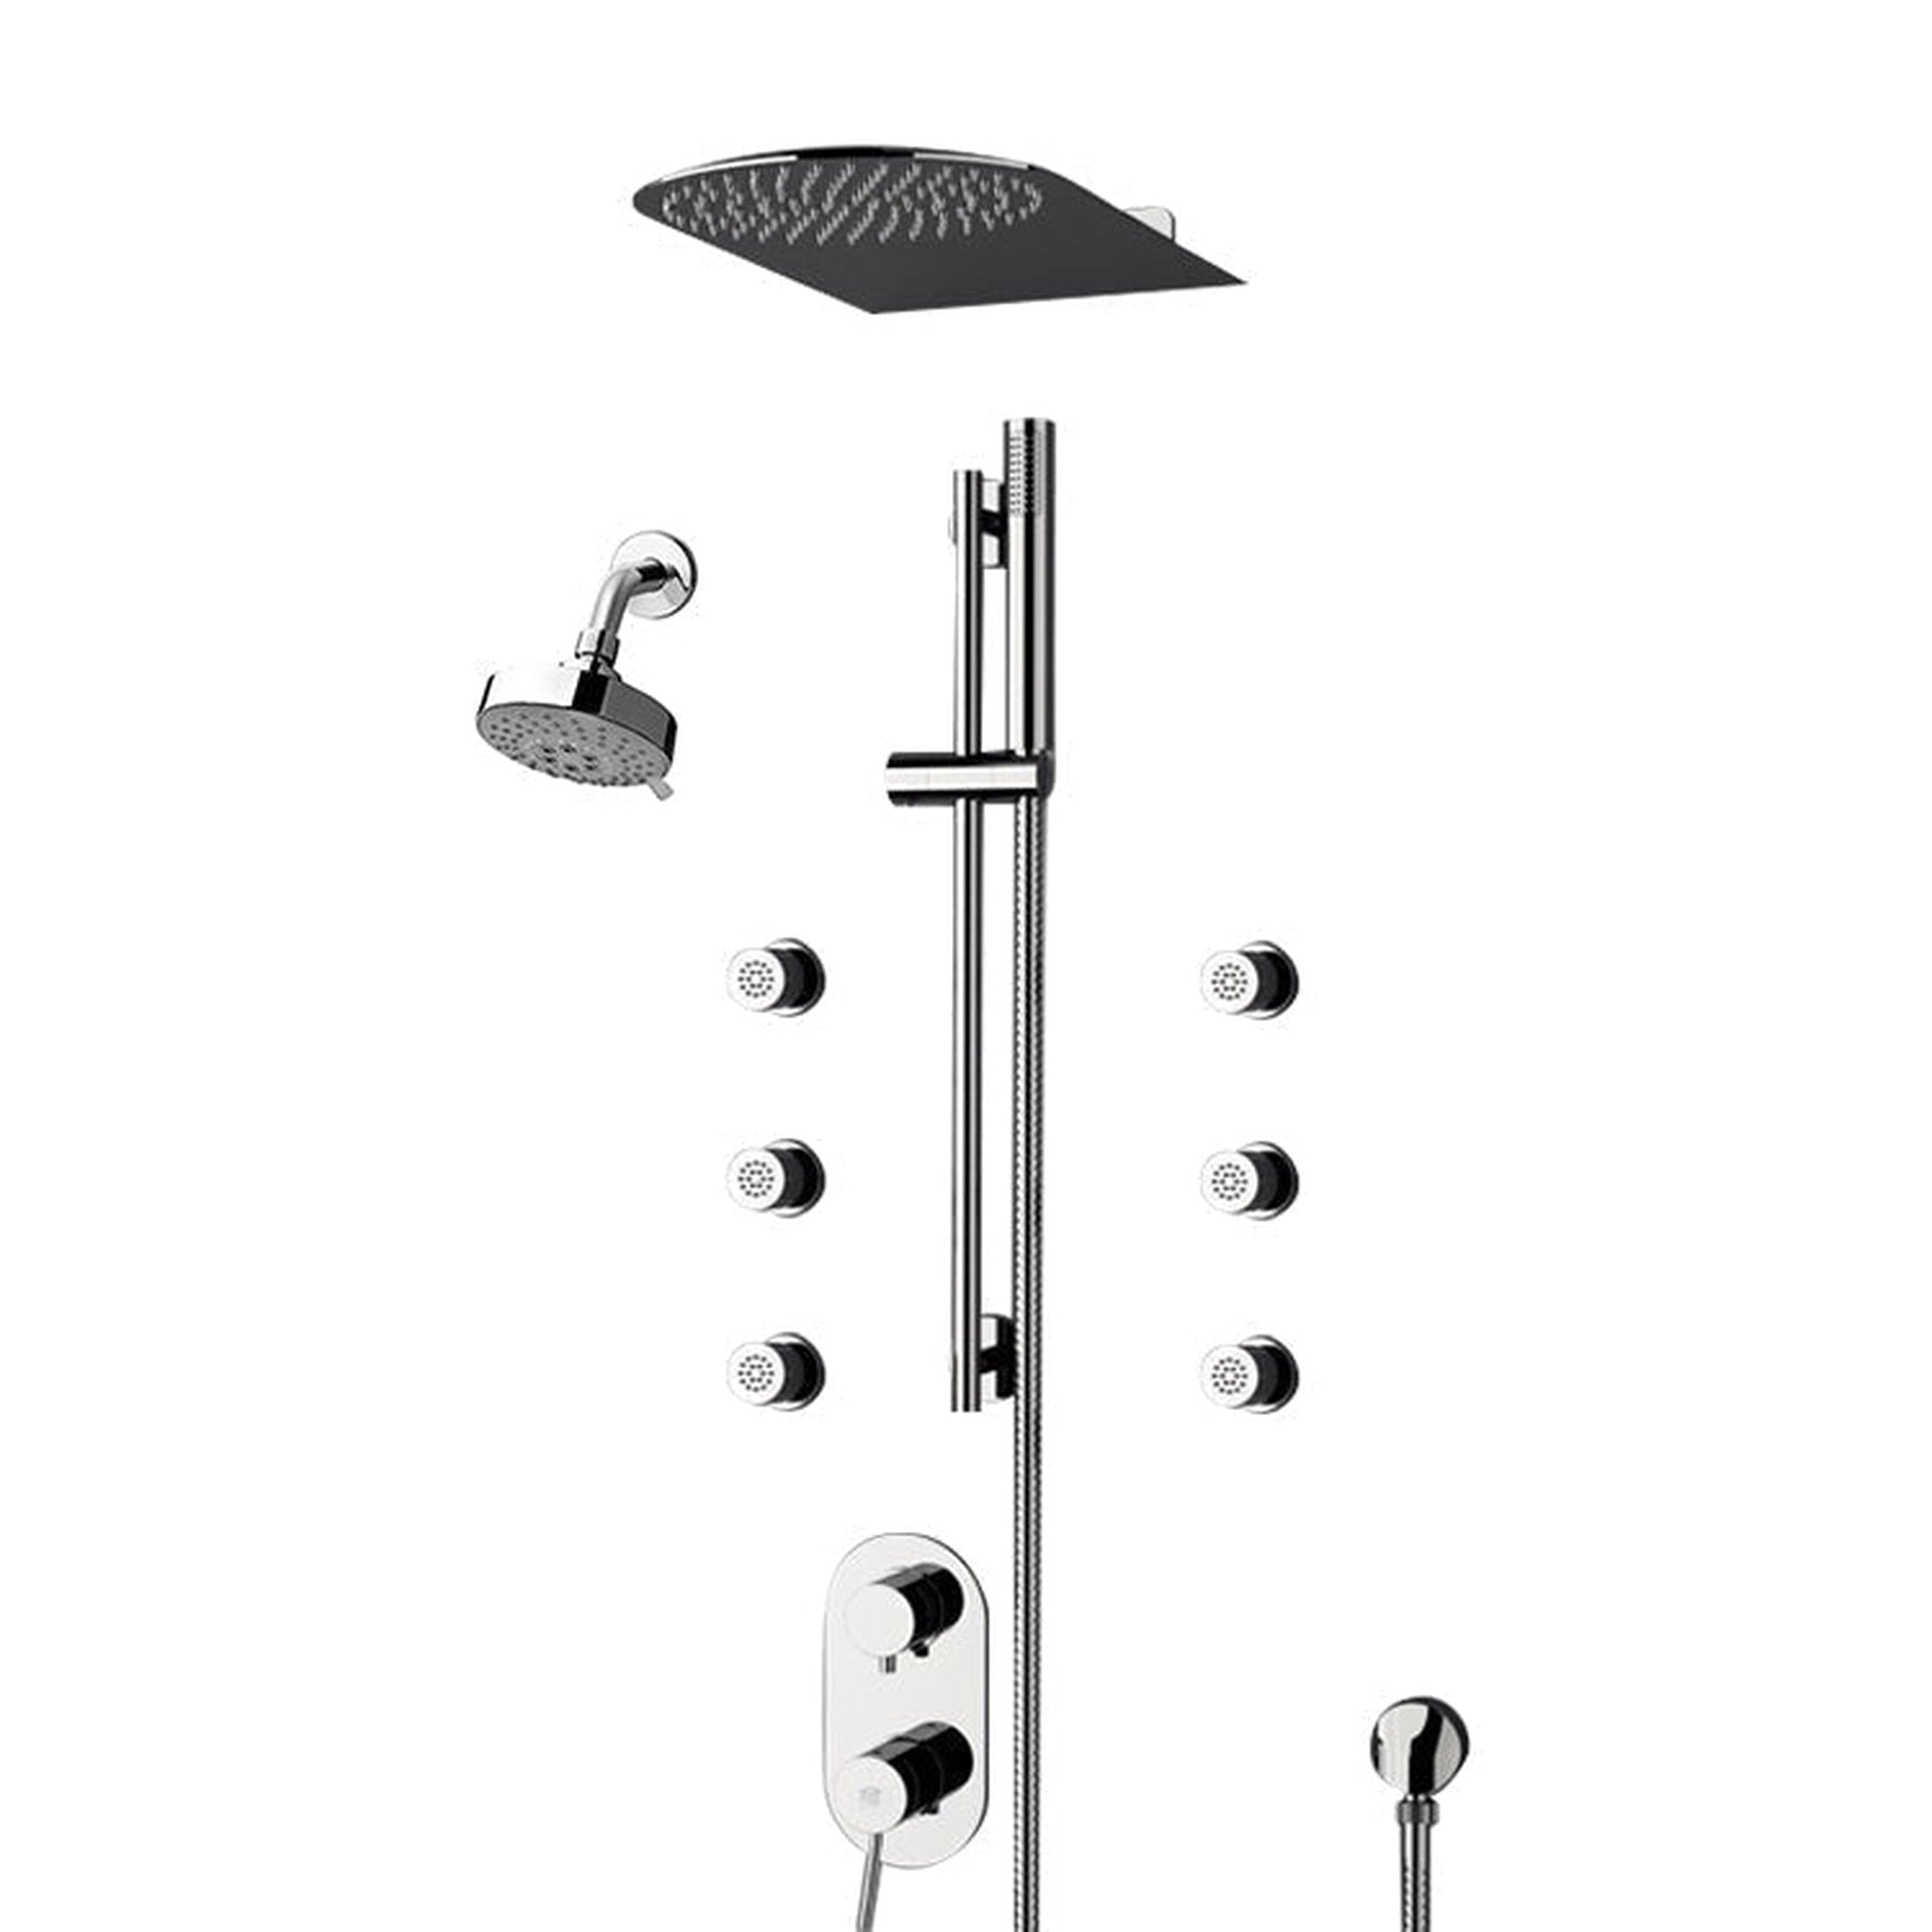 Fontana Deluxe Creative Luxury 24" Chrome Wall-Mounted Dual Shower Head Rainfall Shower System With 6-Jet Sprays and Hand Shower